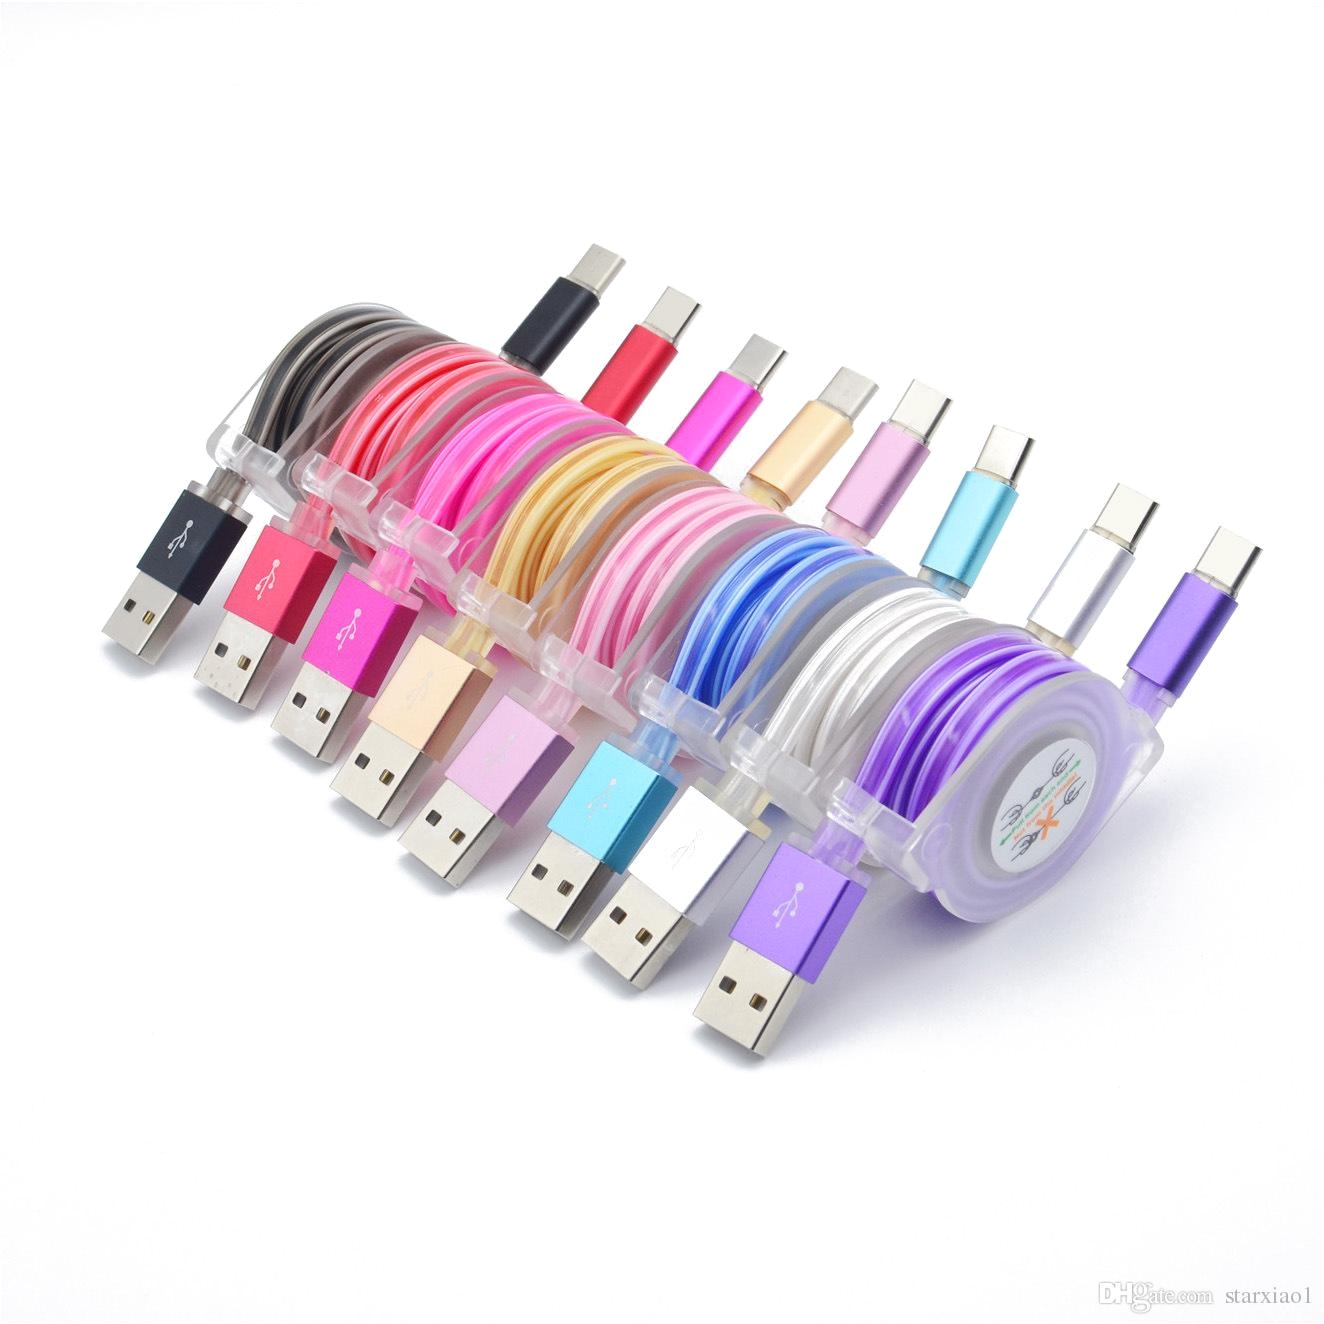 led light up flat noodle micro usb cable type c for samsung i5 smartphone tablet pc colorful retractable cable flexible charging cables internet cables